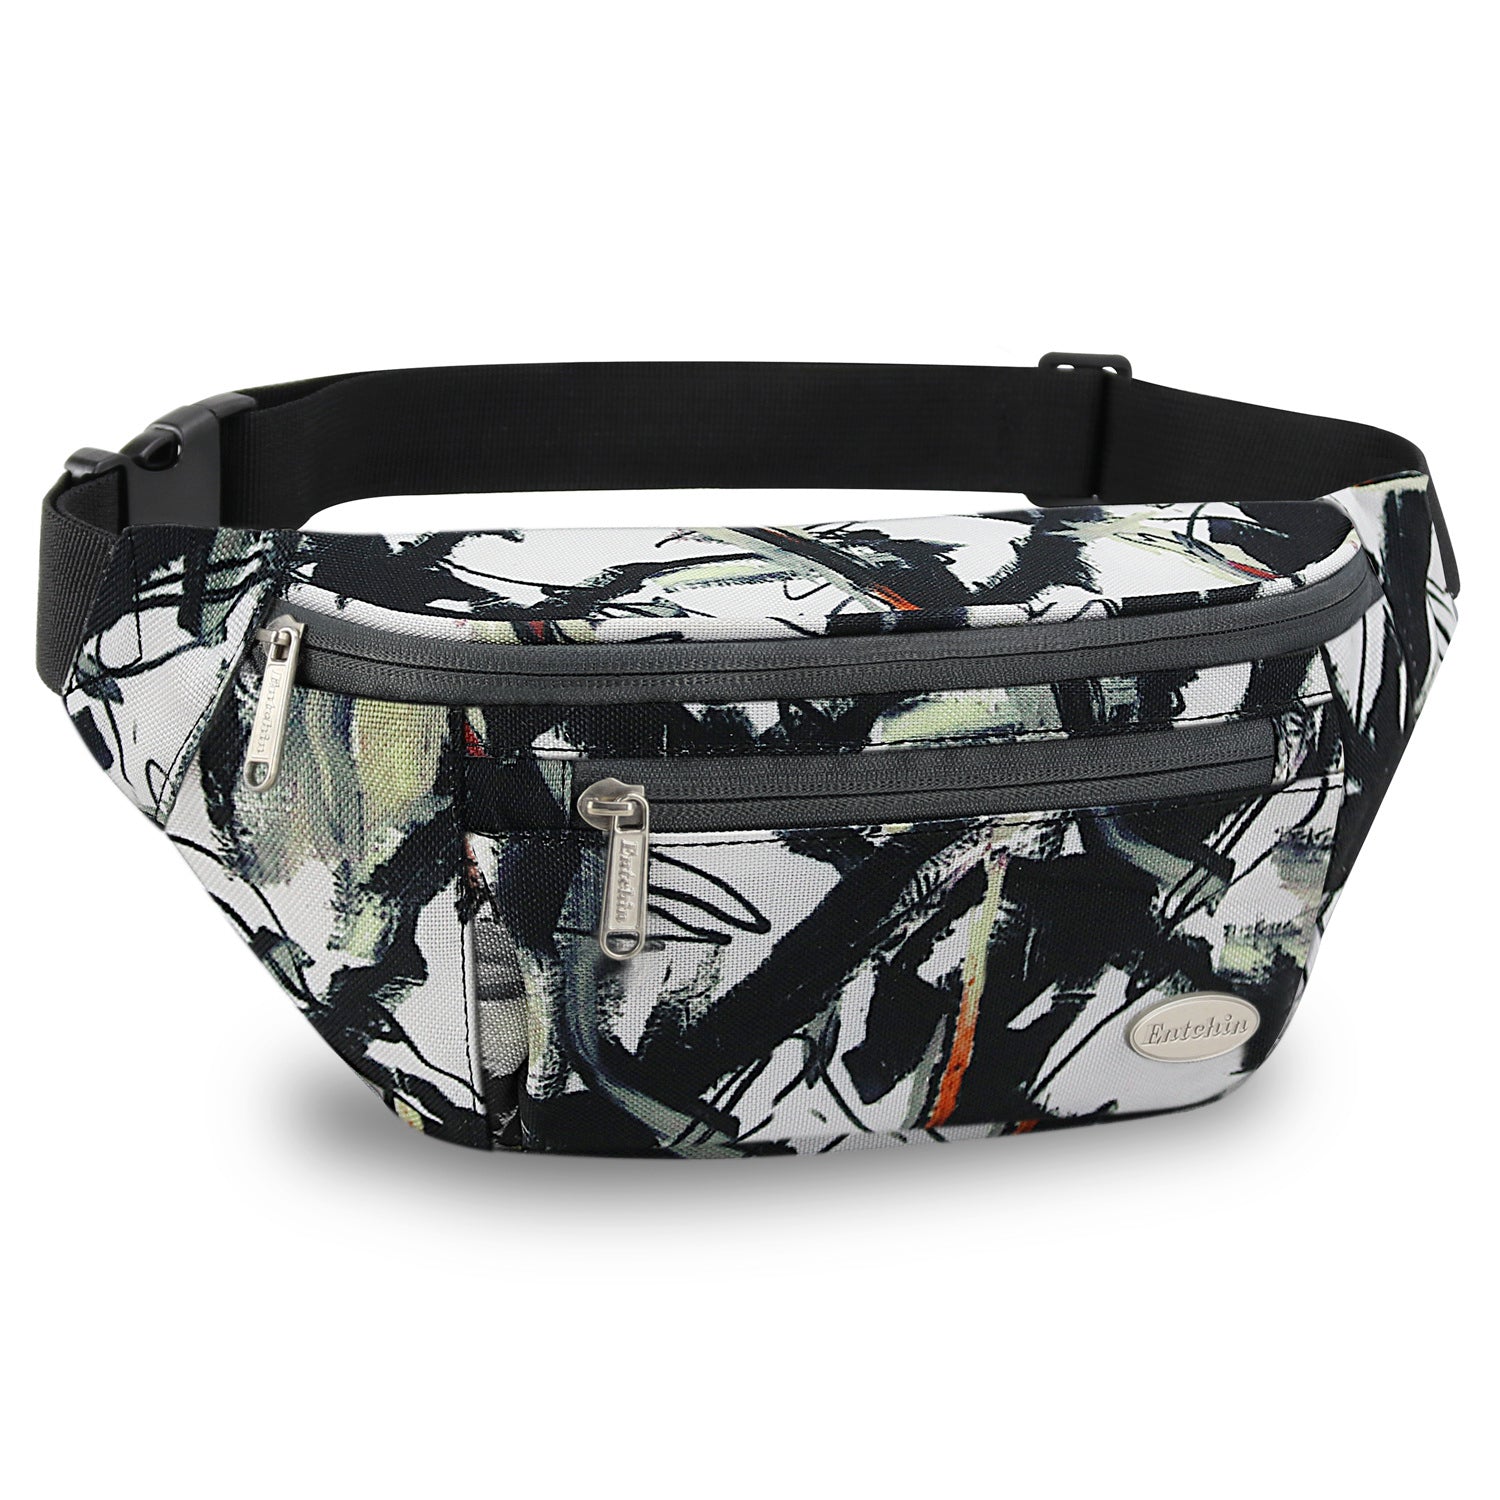  Chardime Fanny Pack,Fishing Fanny Pack for Men, Multiple  Pockets for Easy Organisation,fanny pack for men-Ideal for Travel, Hiking,  and Everyday Use(green)… : Sports & Outdoors